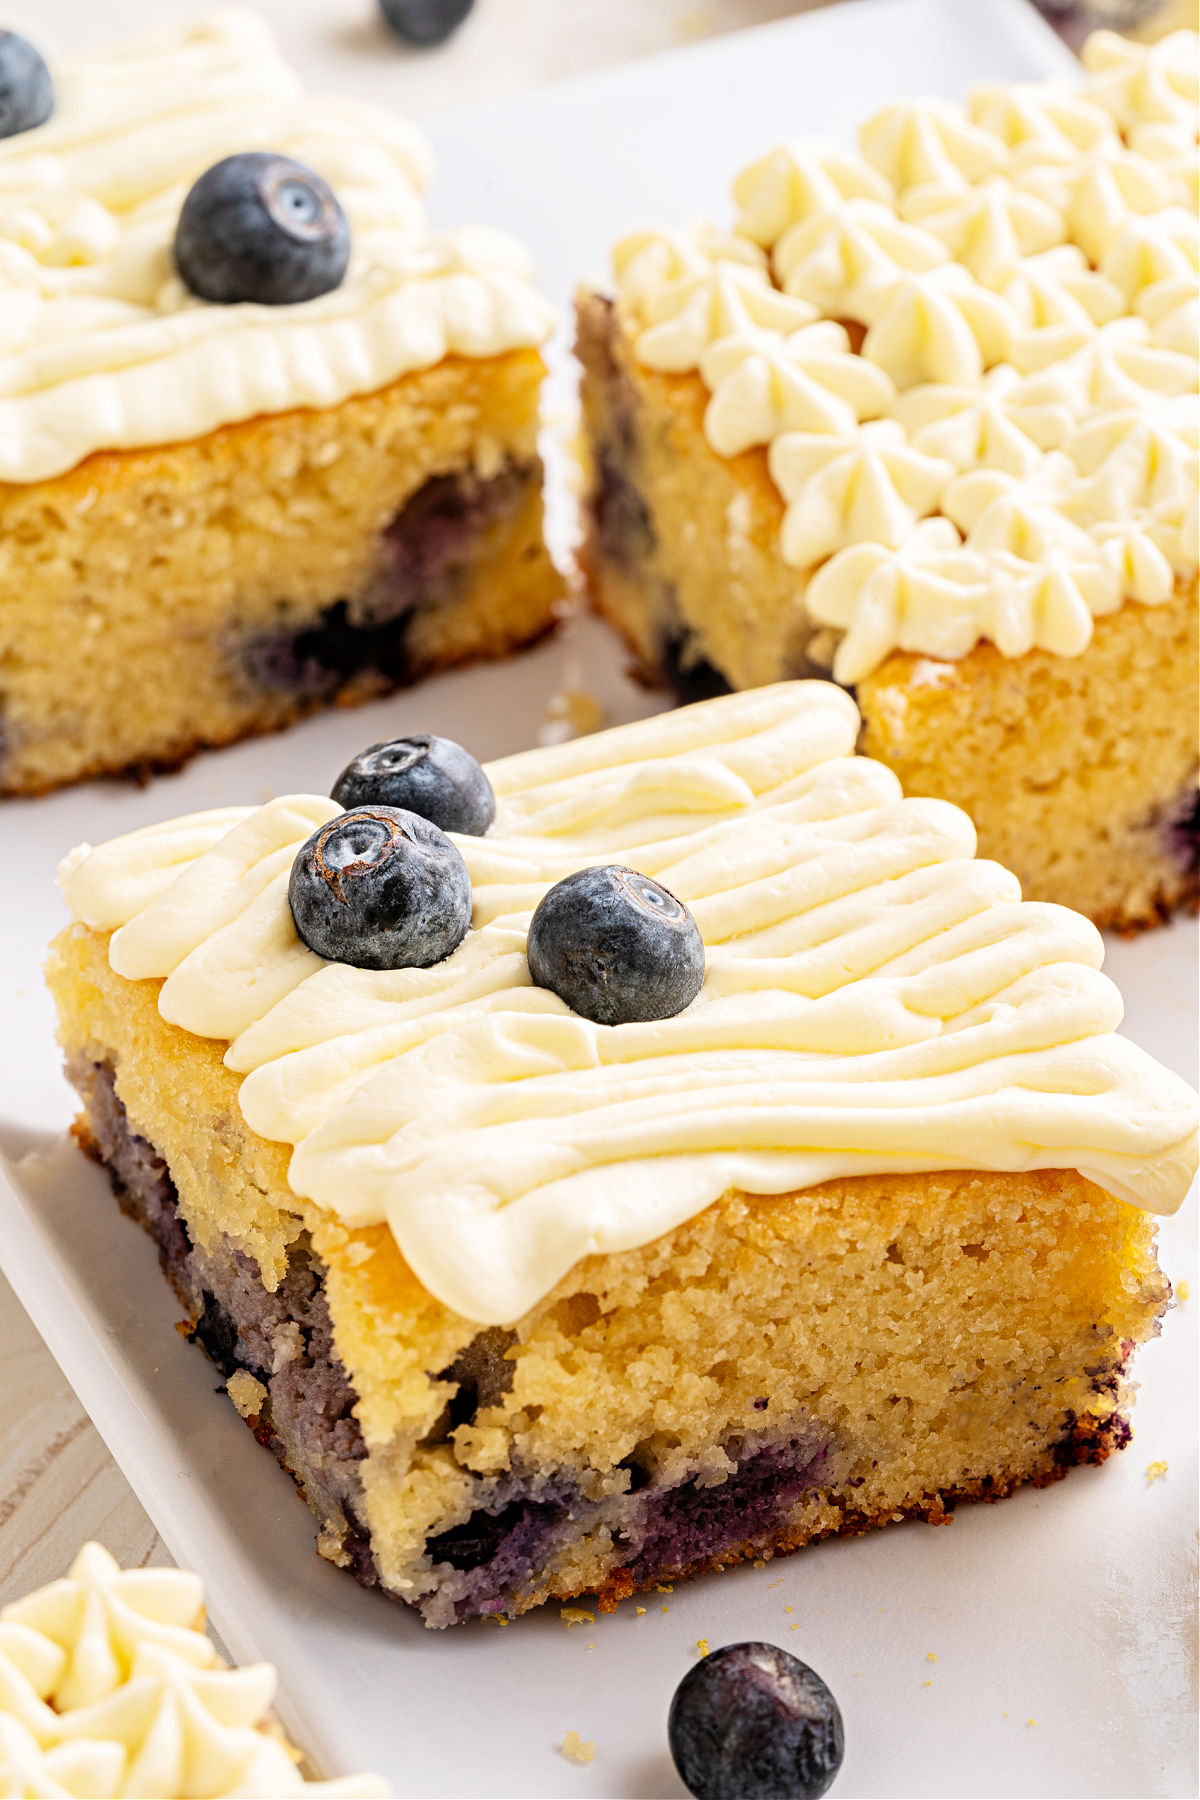 Blueberry lemon cake sliced into squares on a white plate.